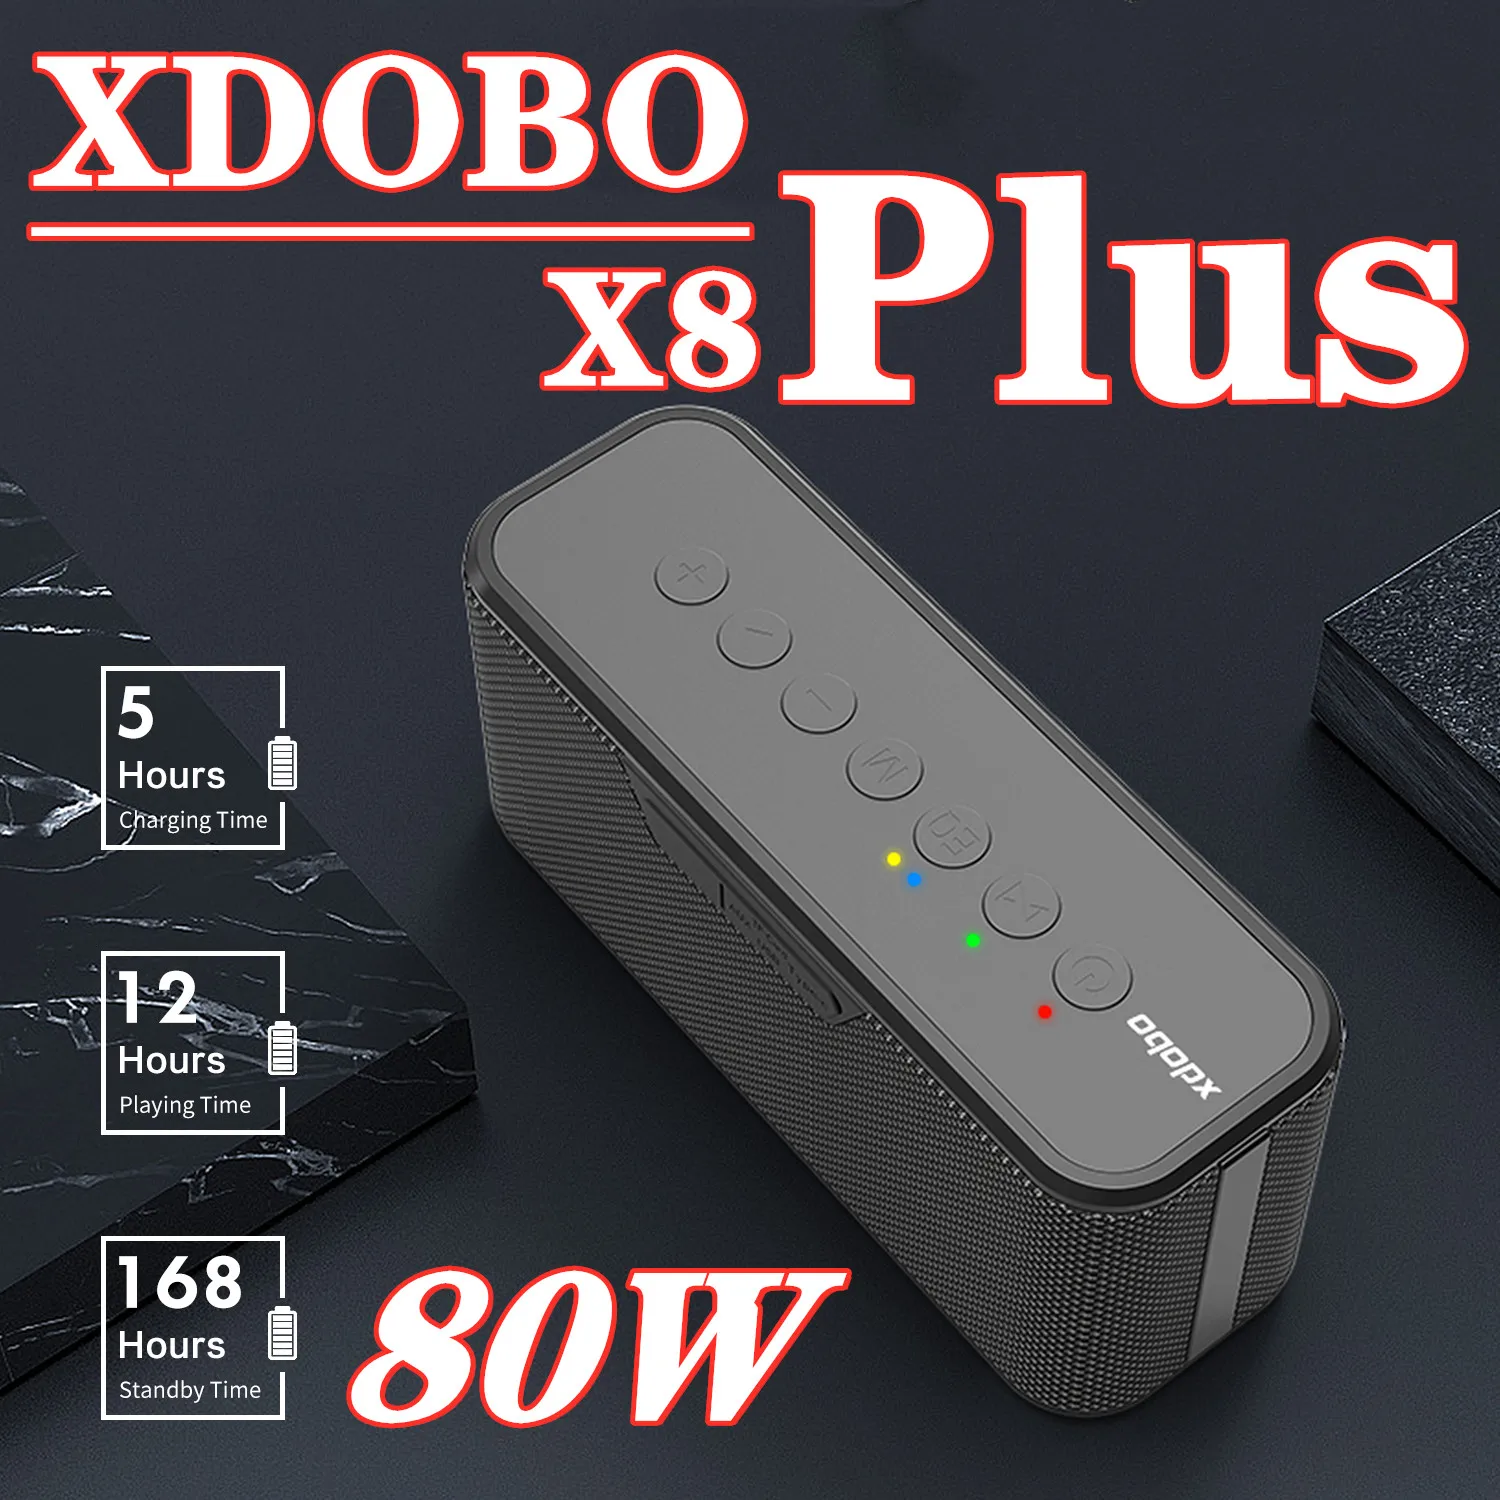 

XDOBO X8 Plus 80W Bluetooth Speaker Box TWS Wireless Subwoofer Boombox Built-in DSP Chip HiFi Stereo Home Theater Music Center